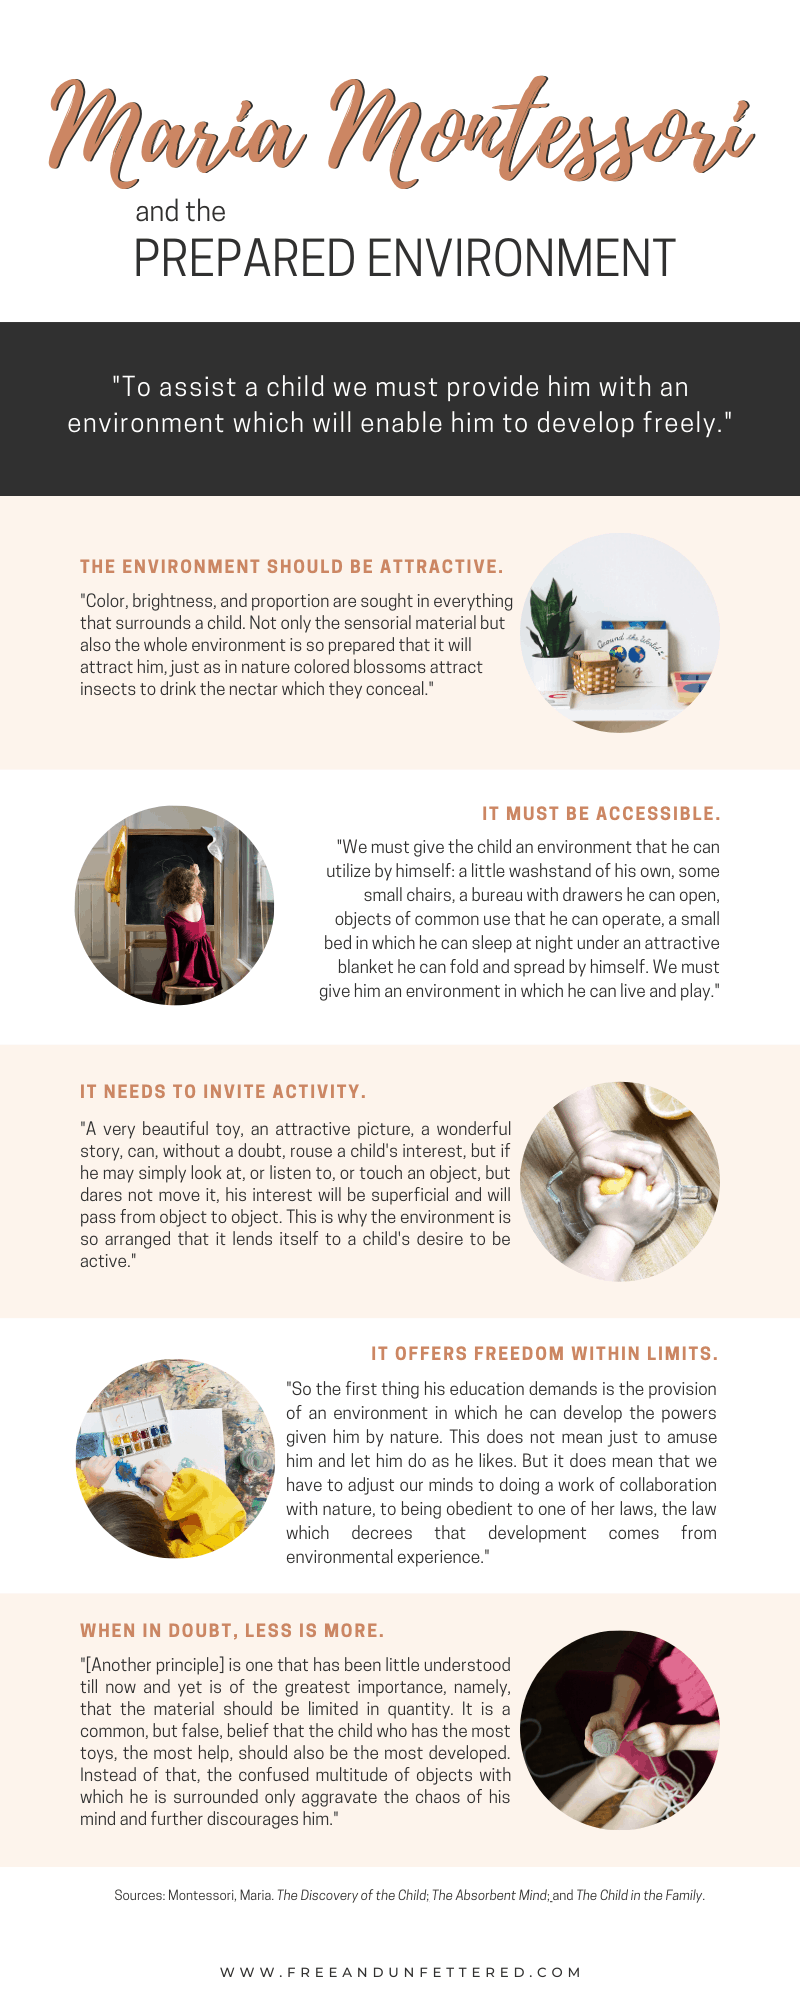 Interested in learning more about how to prepare an environment for children that fosters independent learning and exploration? Visit www.freeandunfettered.com to view our Montessori-inspired schoolroom and playroom and grab a free copy of our guide to Designing Spaces with Children. #montessoriathome #preparedenvironment #kidsroom #childledlearning 